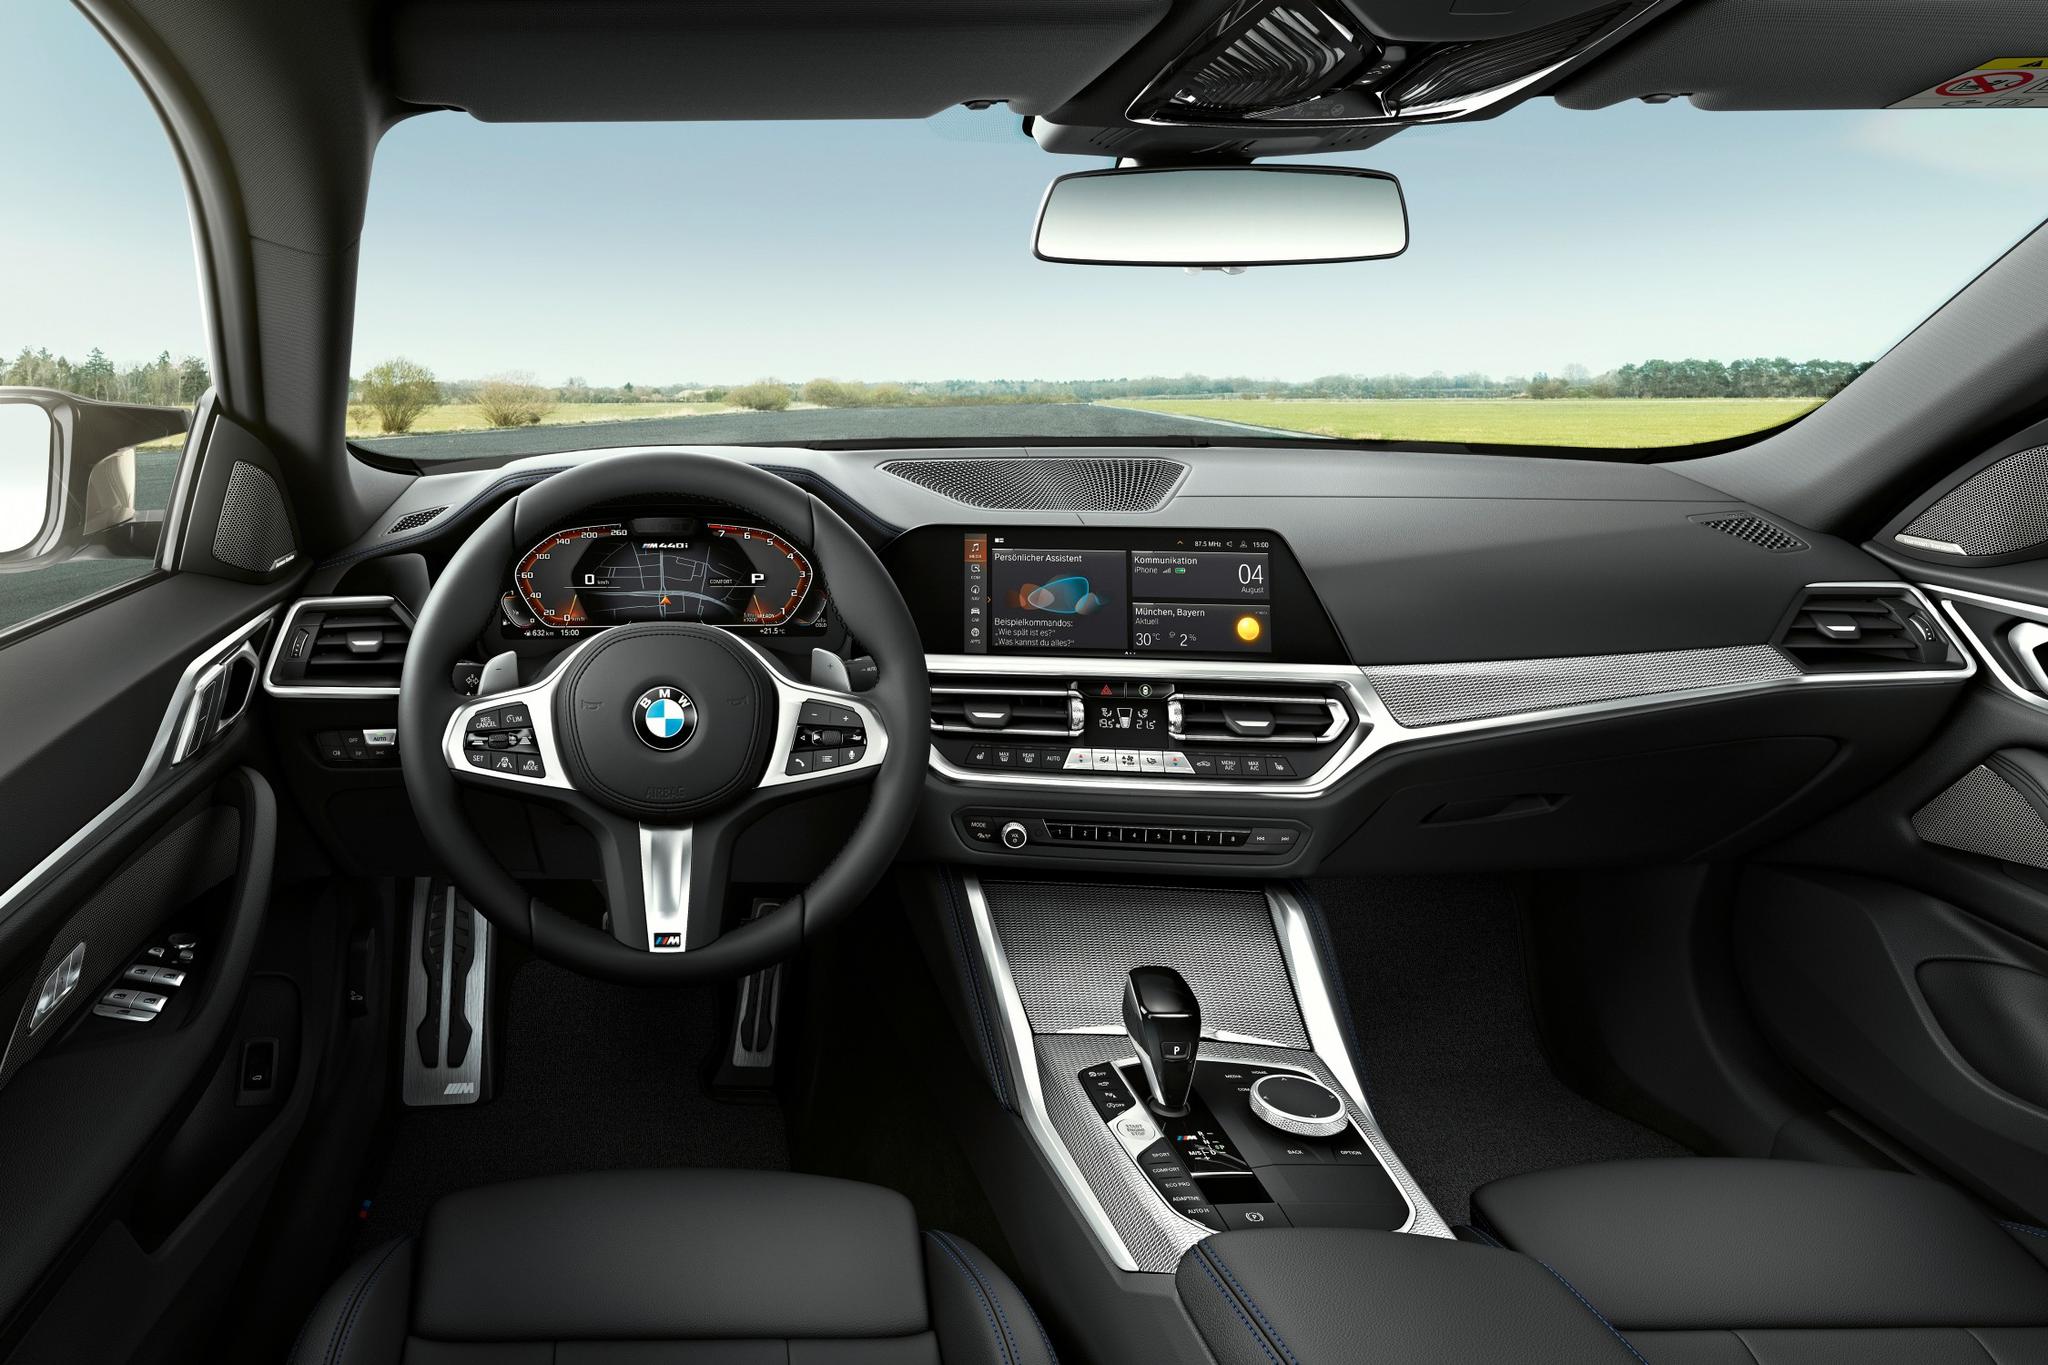 The all-new BMW 4 Series Gran Coupé